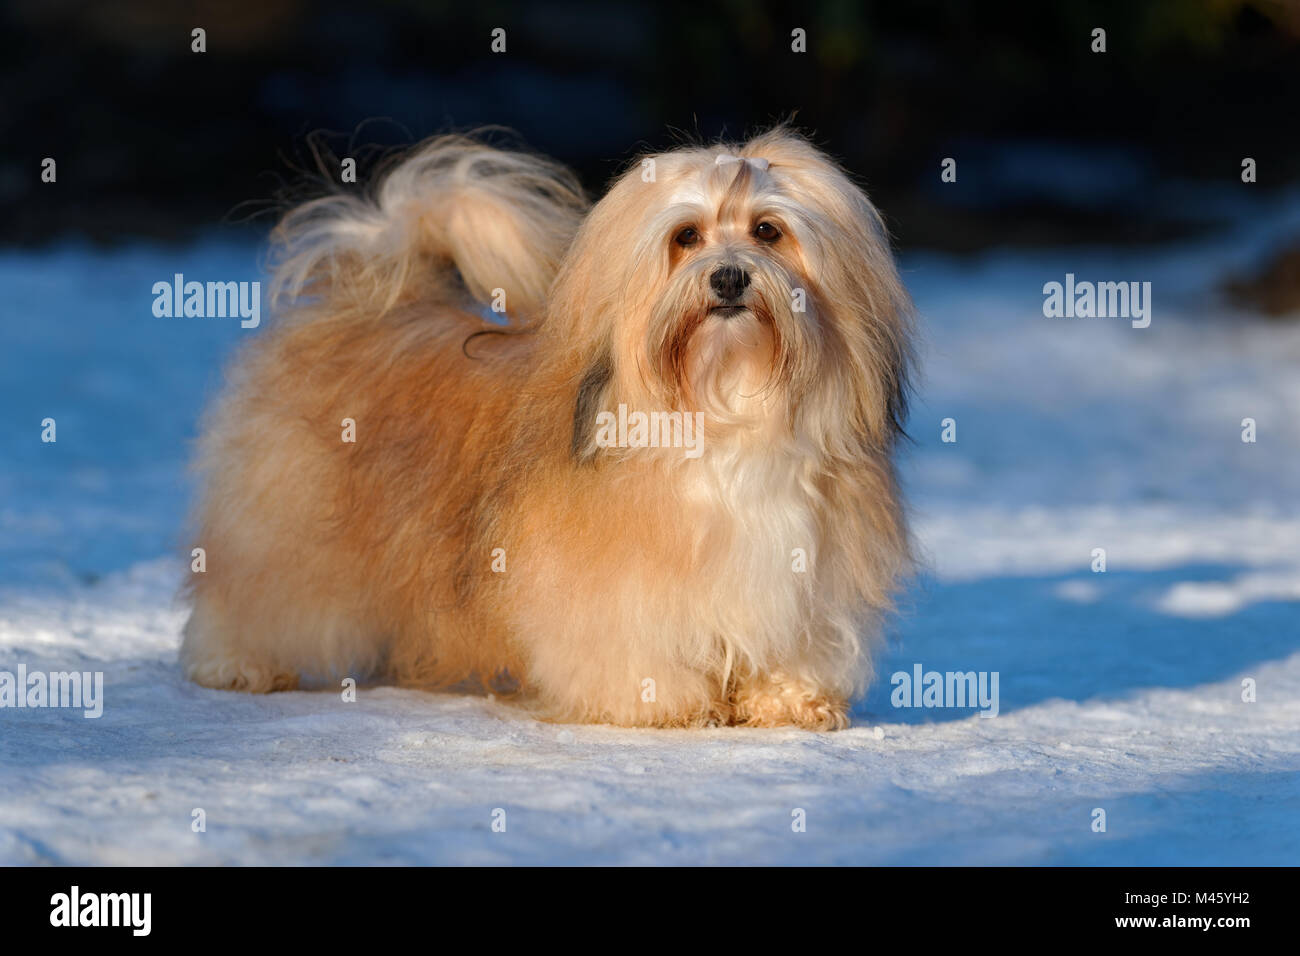 Beautiful show havanese female dog stands in a snowy park Stock Photo - Alamy